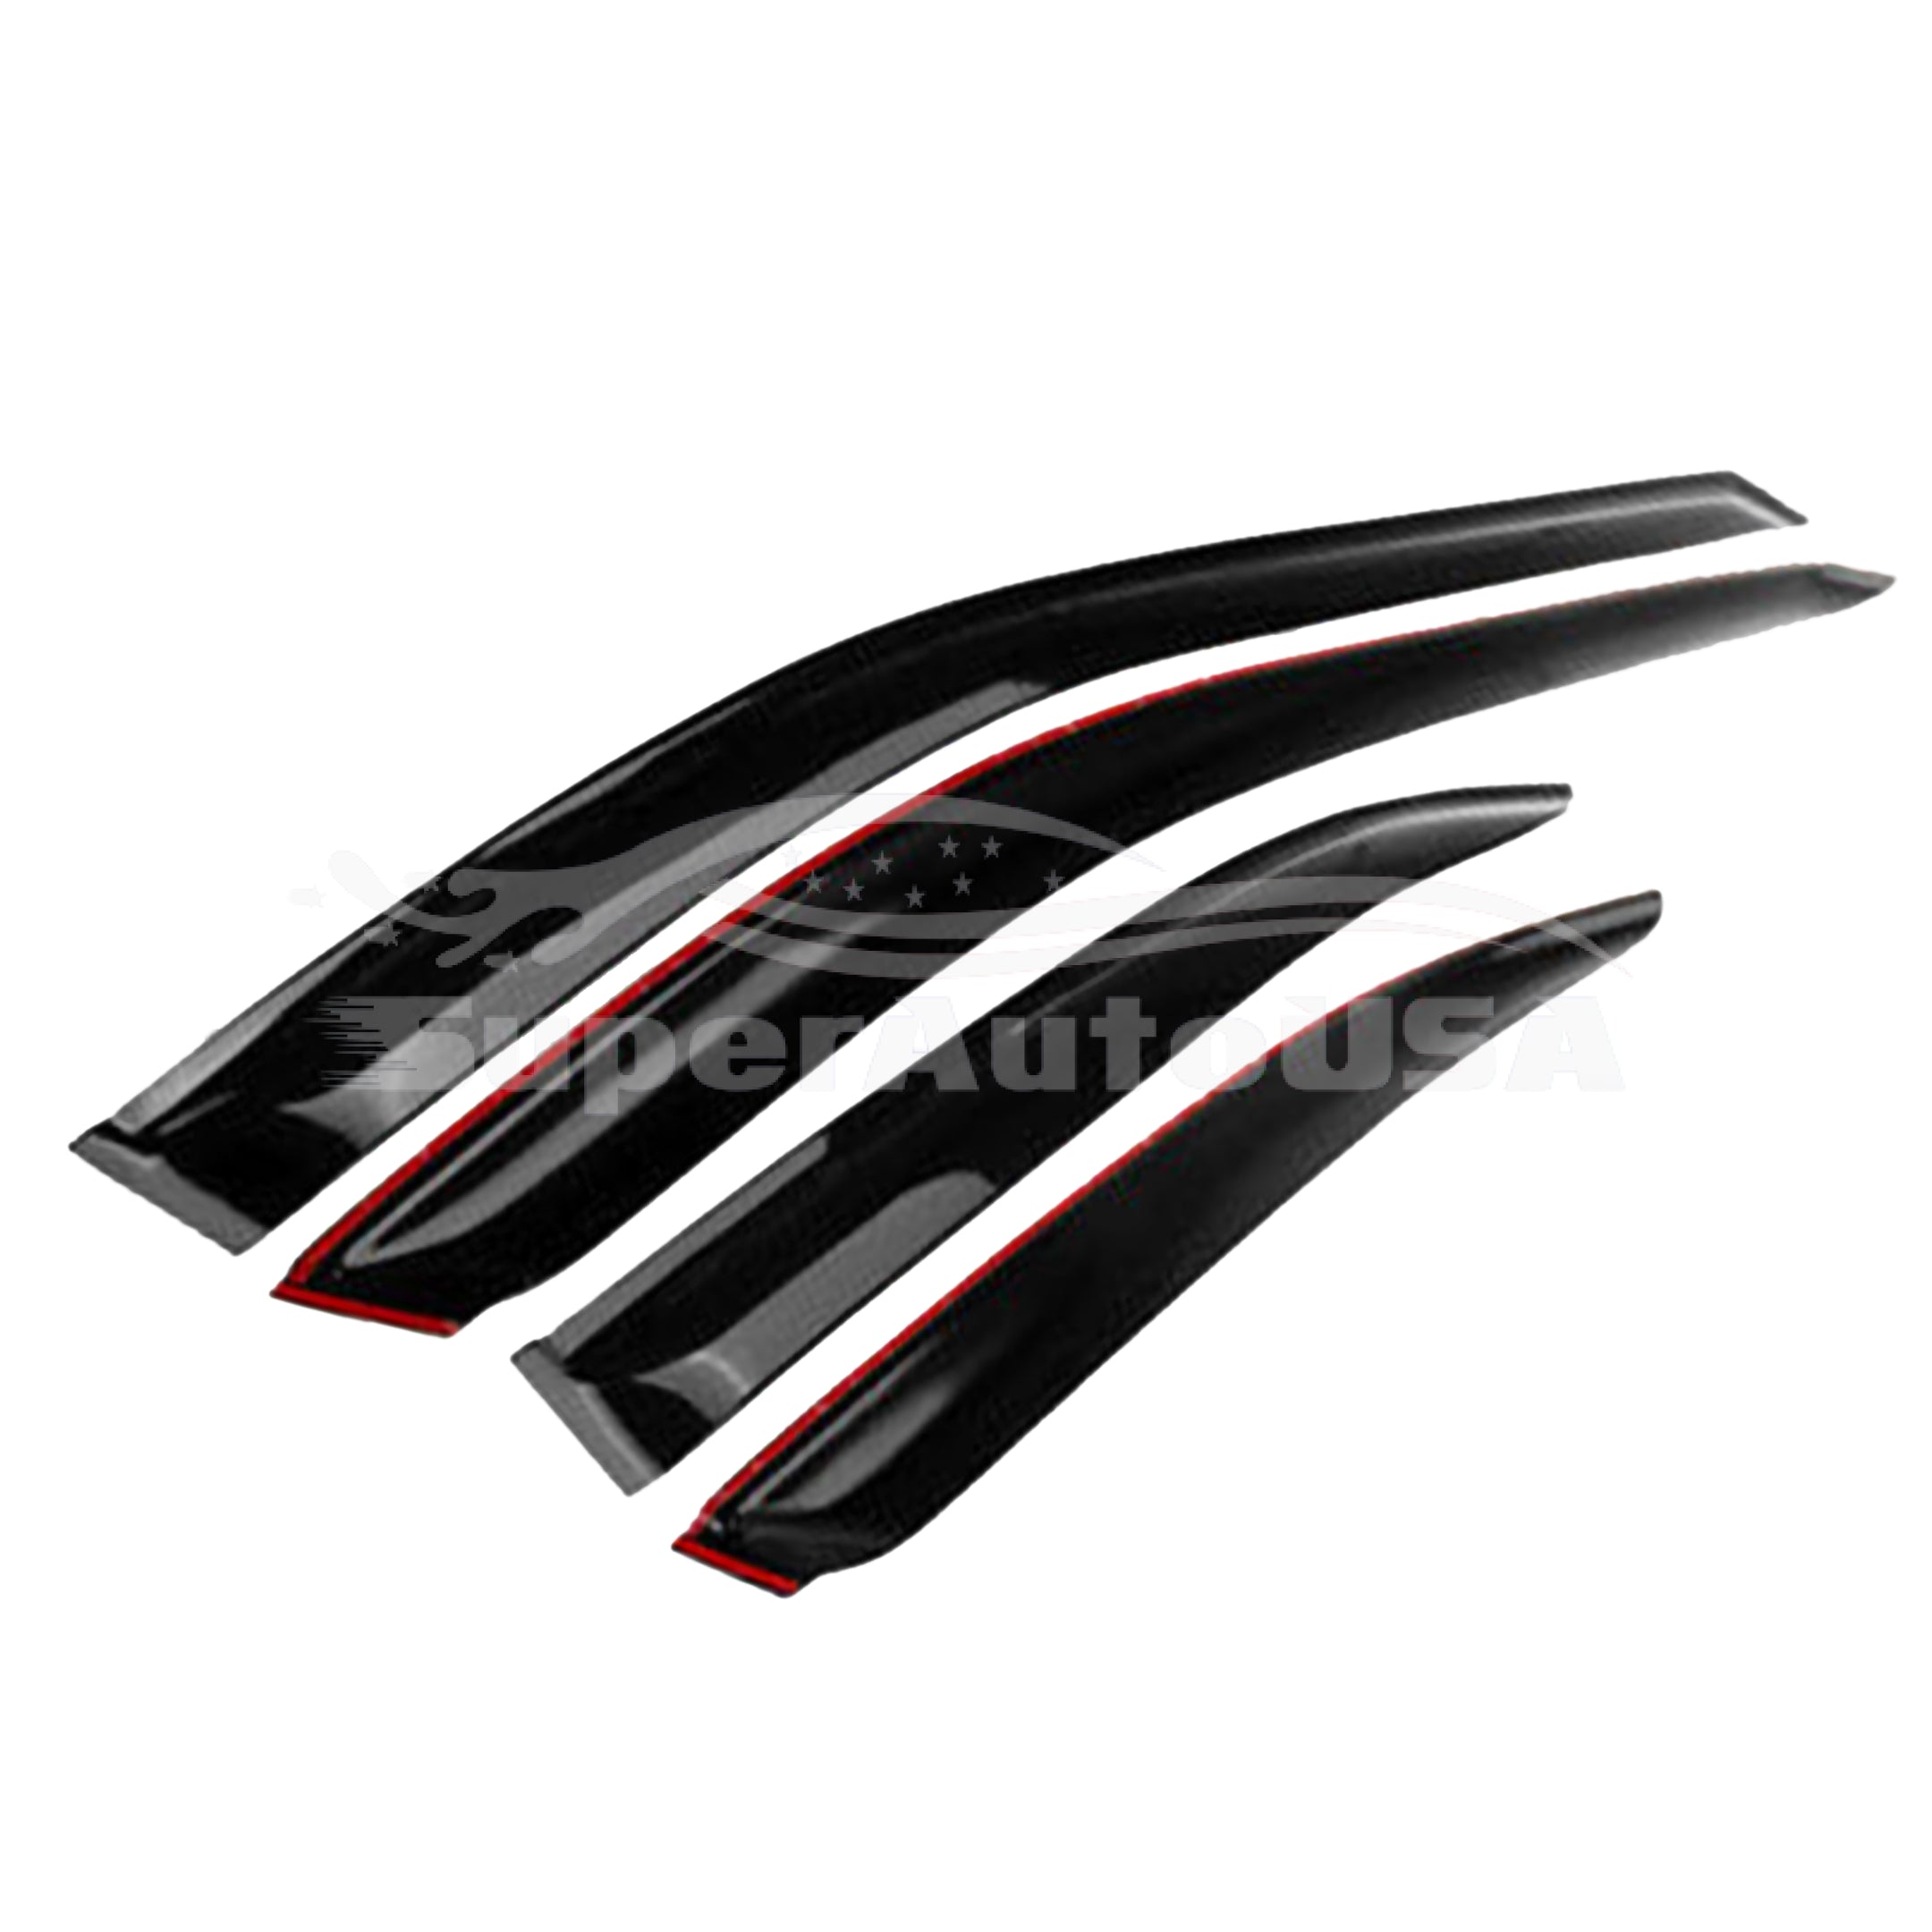 For Hyundai Accent 2012-2017 Out-Channel Vent Window Visors Rain Sun Wind Guards Shade Deflectors